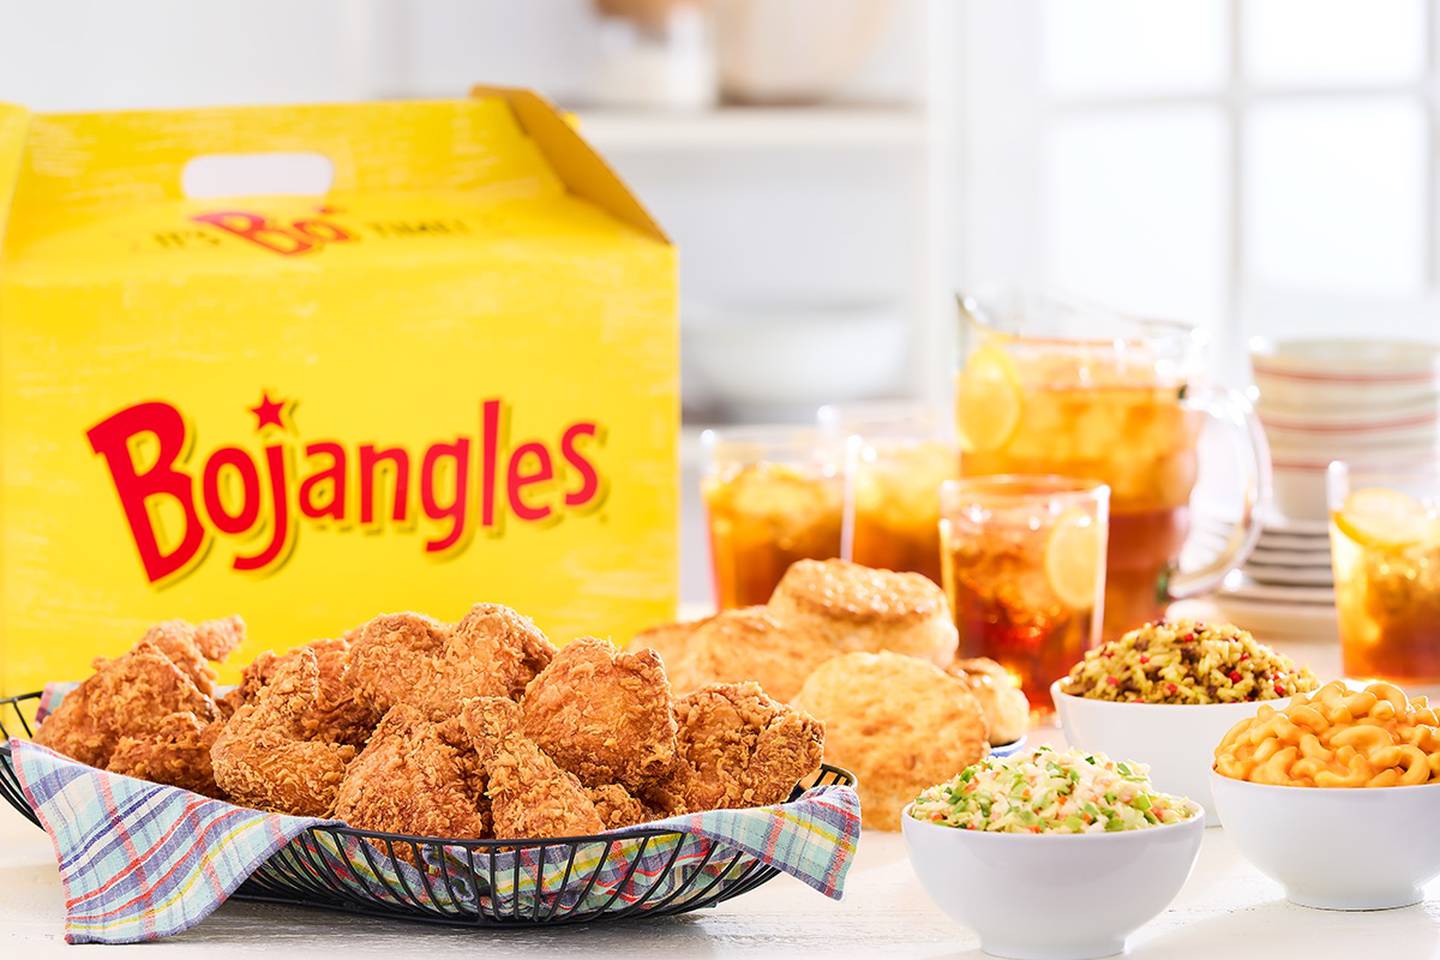 Bojangles, the North Carolina fast food restaurant known for its fried chicken and biscuits, is planning to expands its footprint in Maryland.